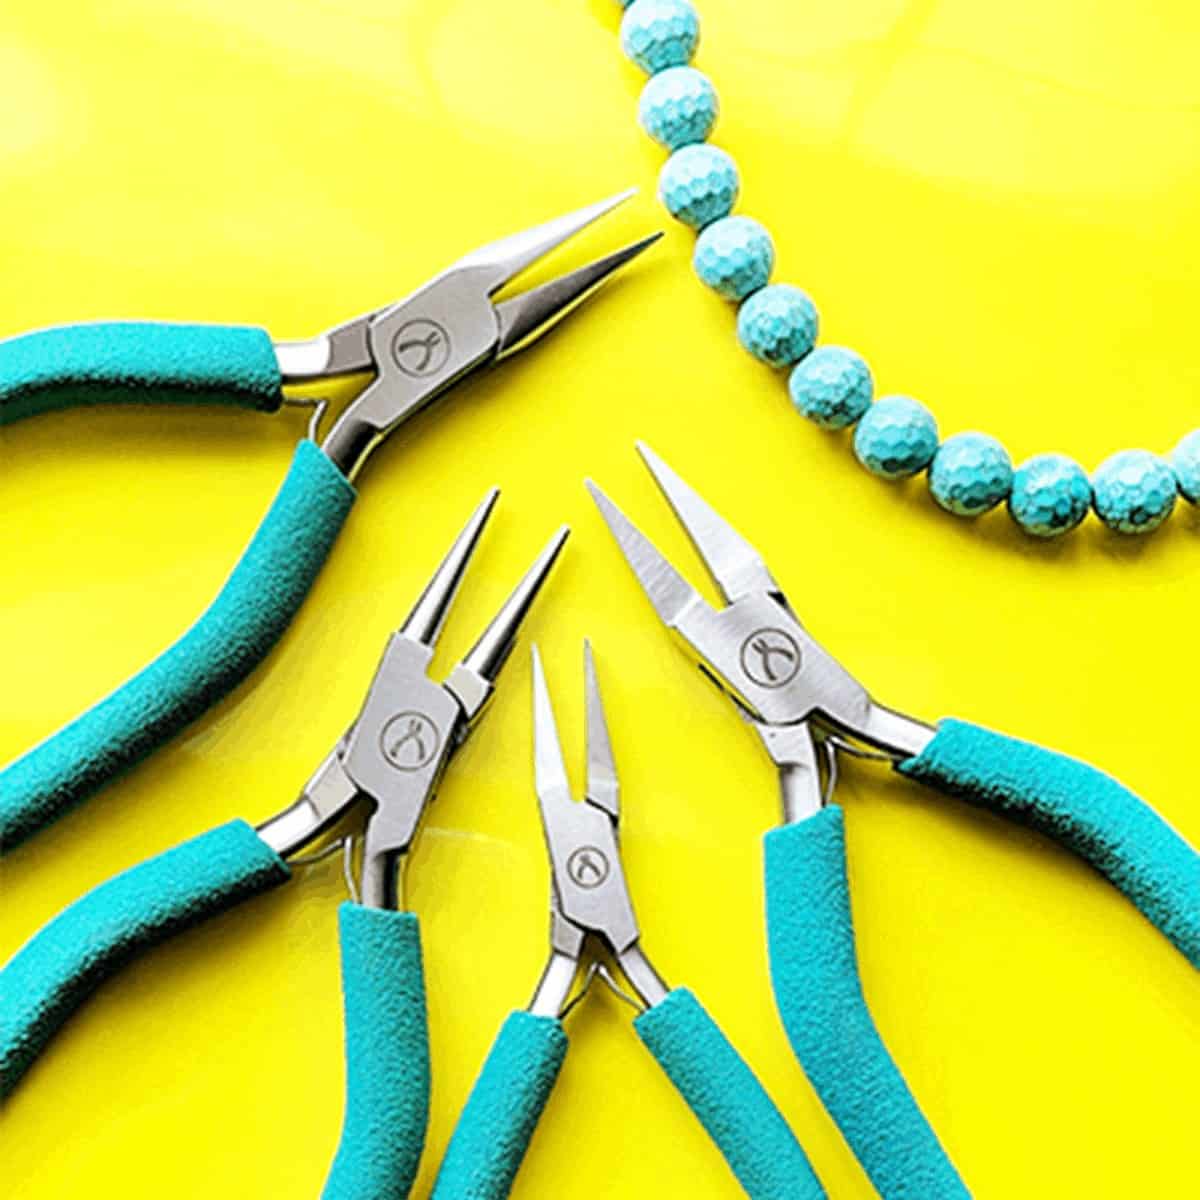 jewelry making pliers guide